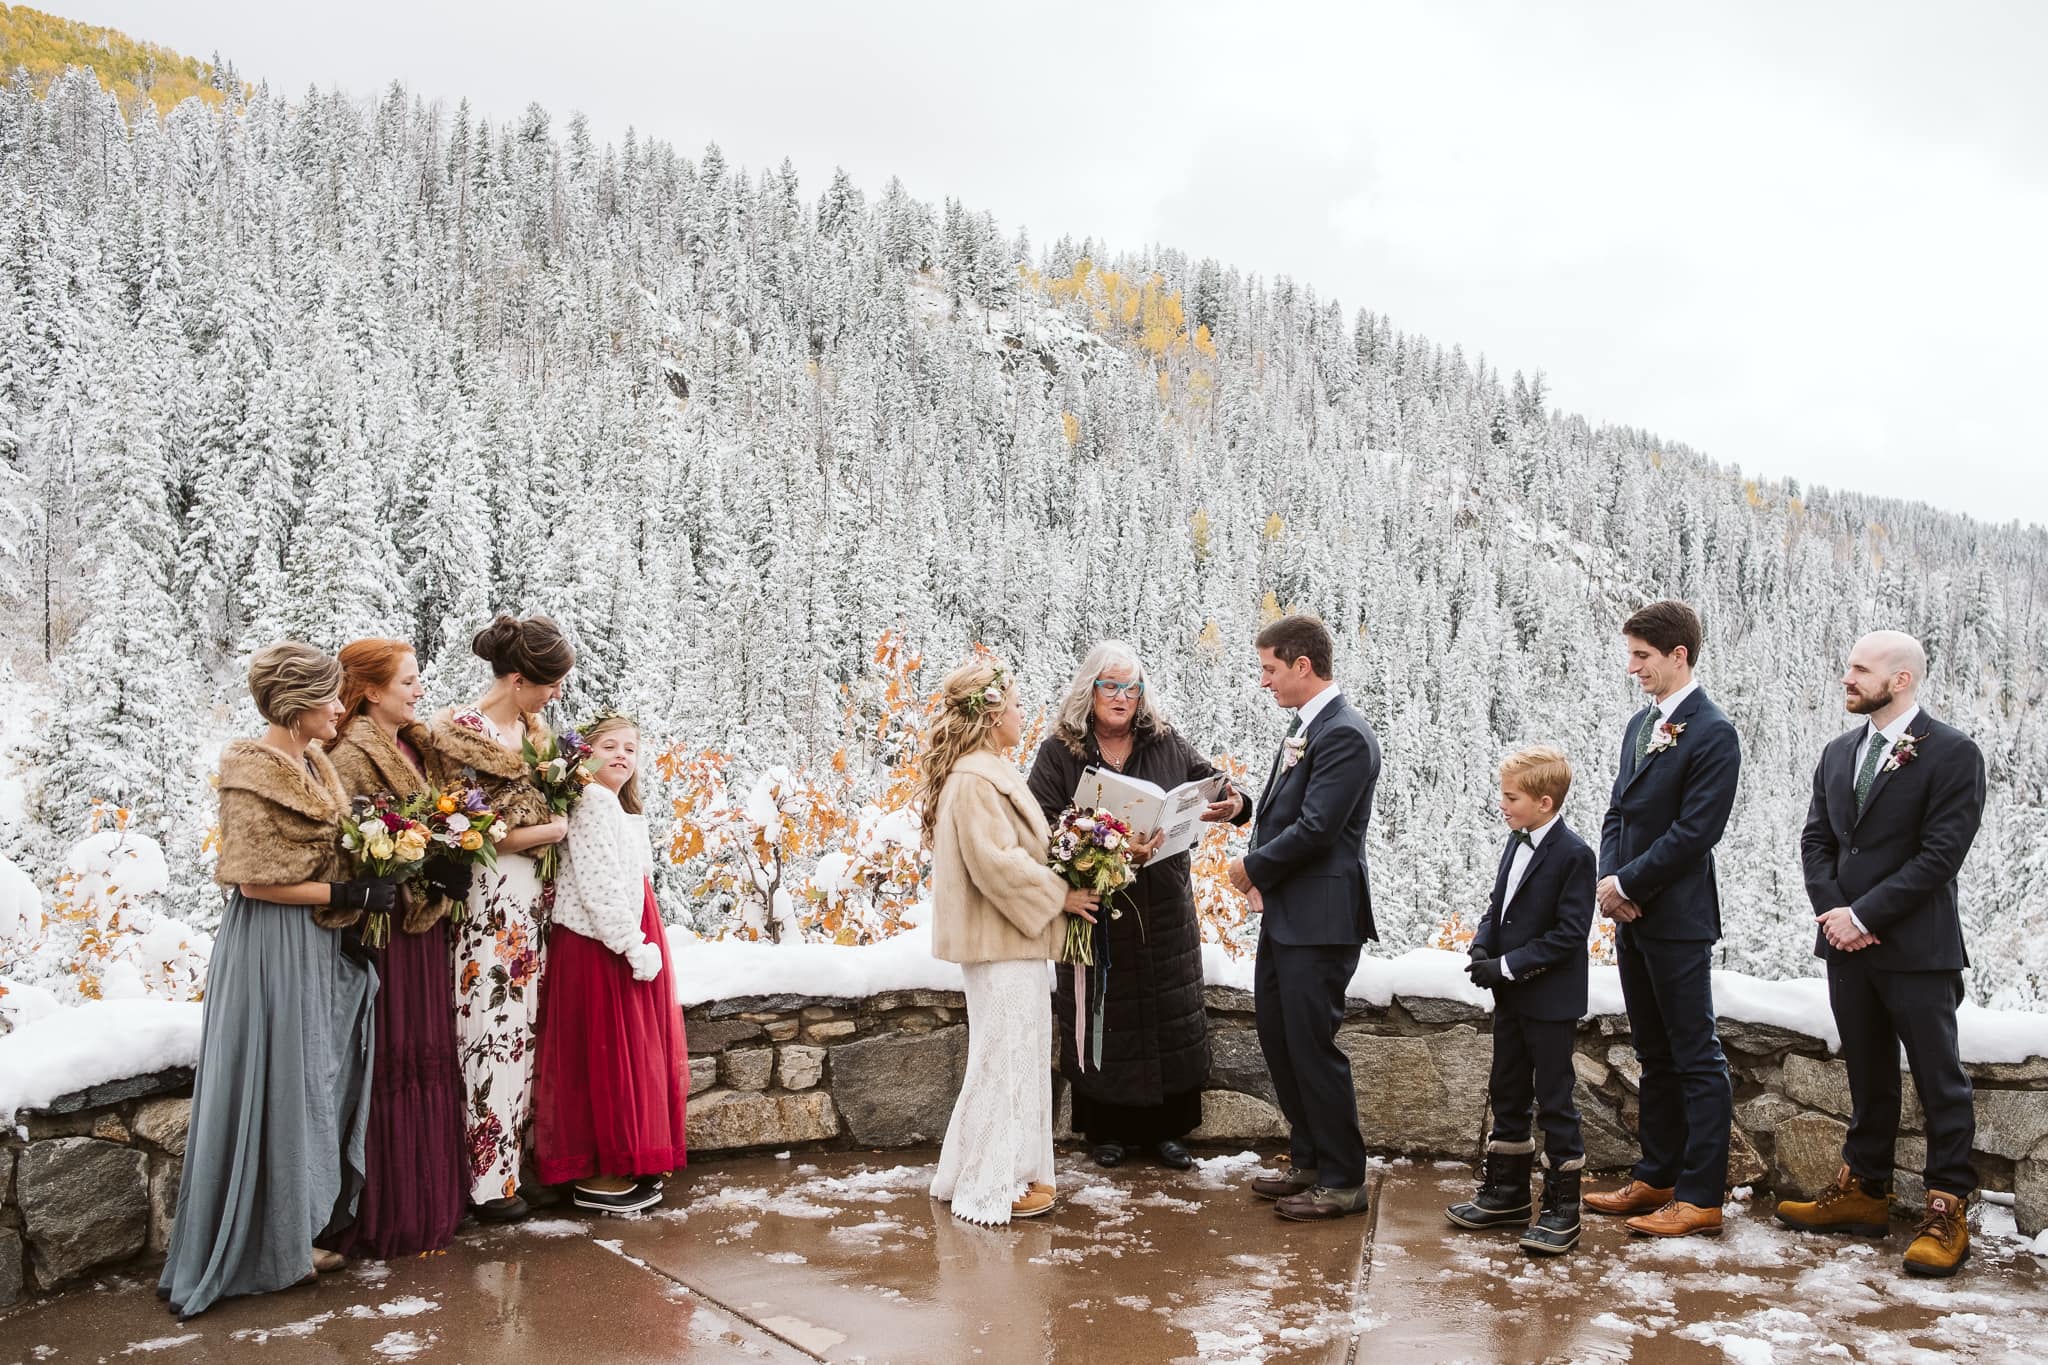 Elopement ceremony at Fish Creek Falls overlook in Steamboat Springs